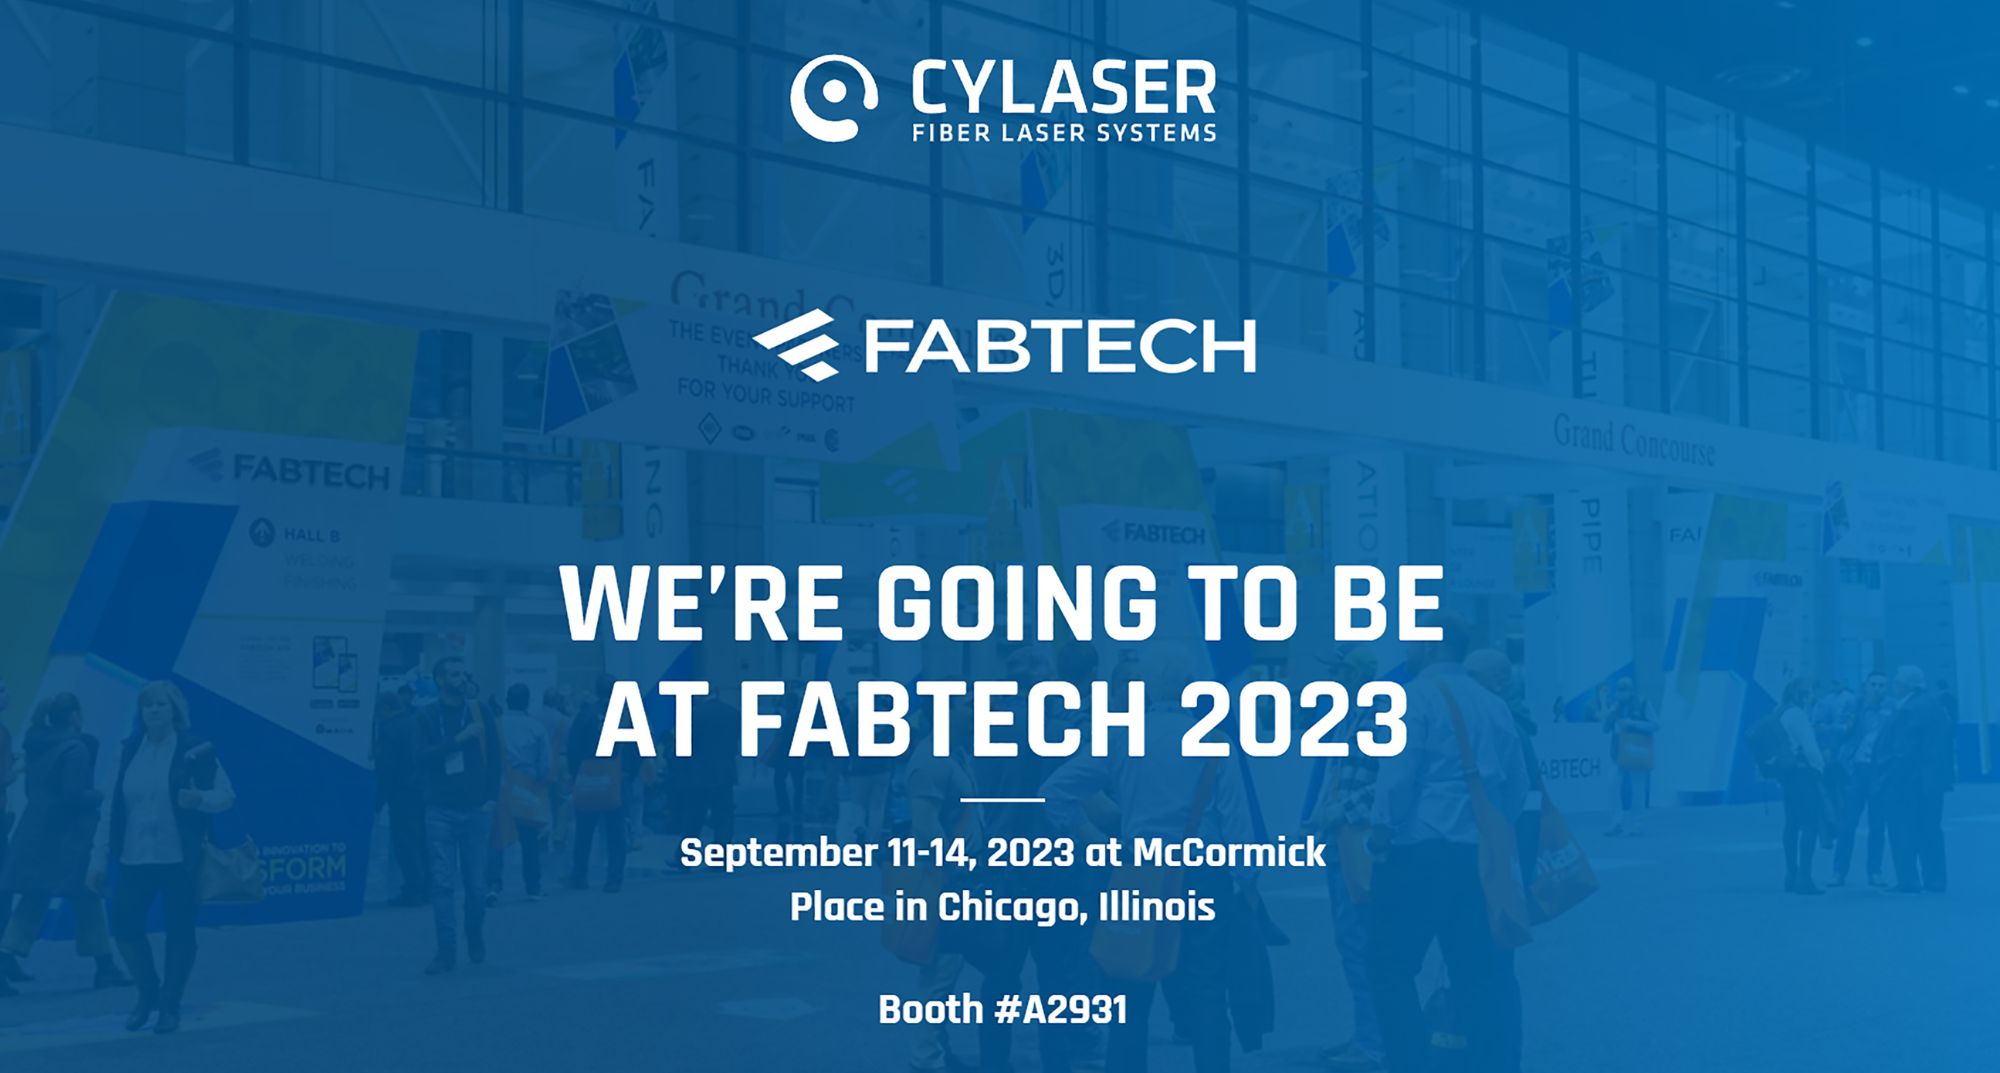 Cy-laser will expose at Fabtech 2023